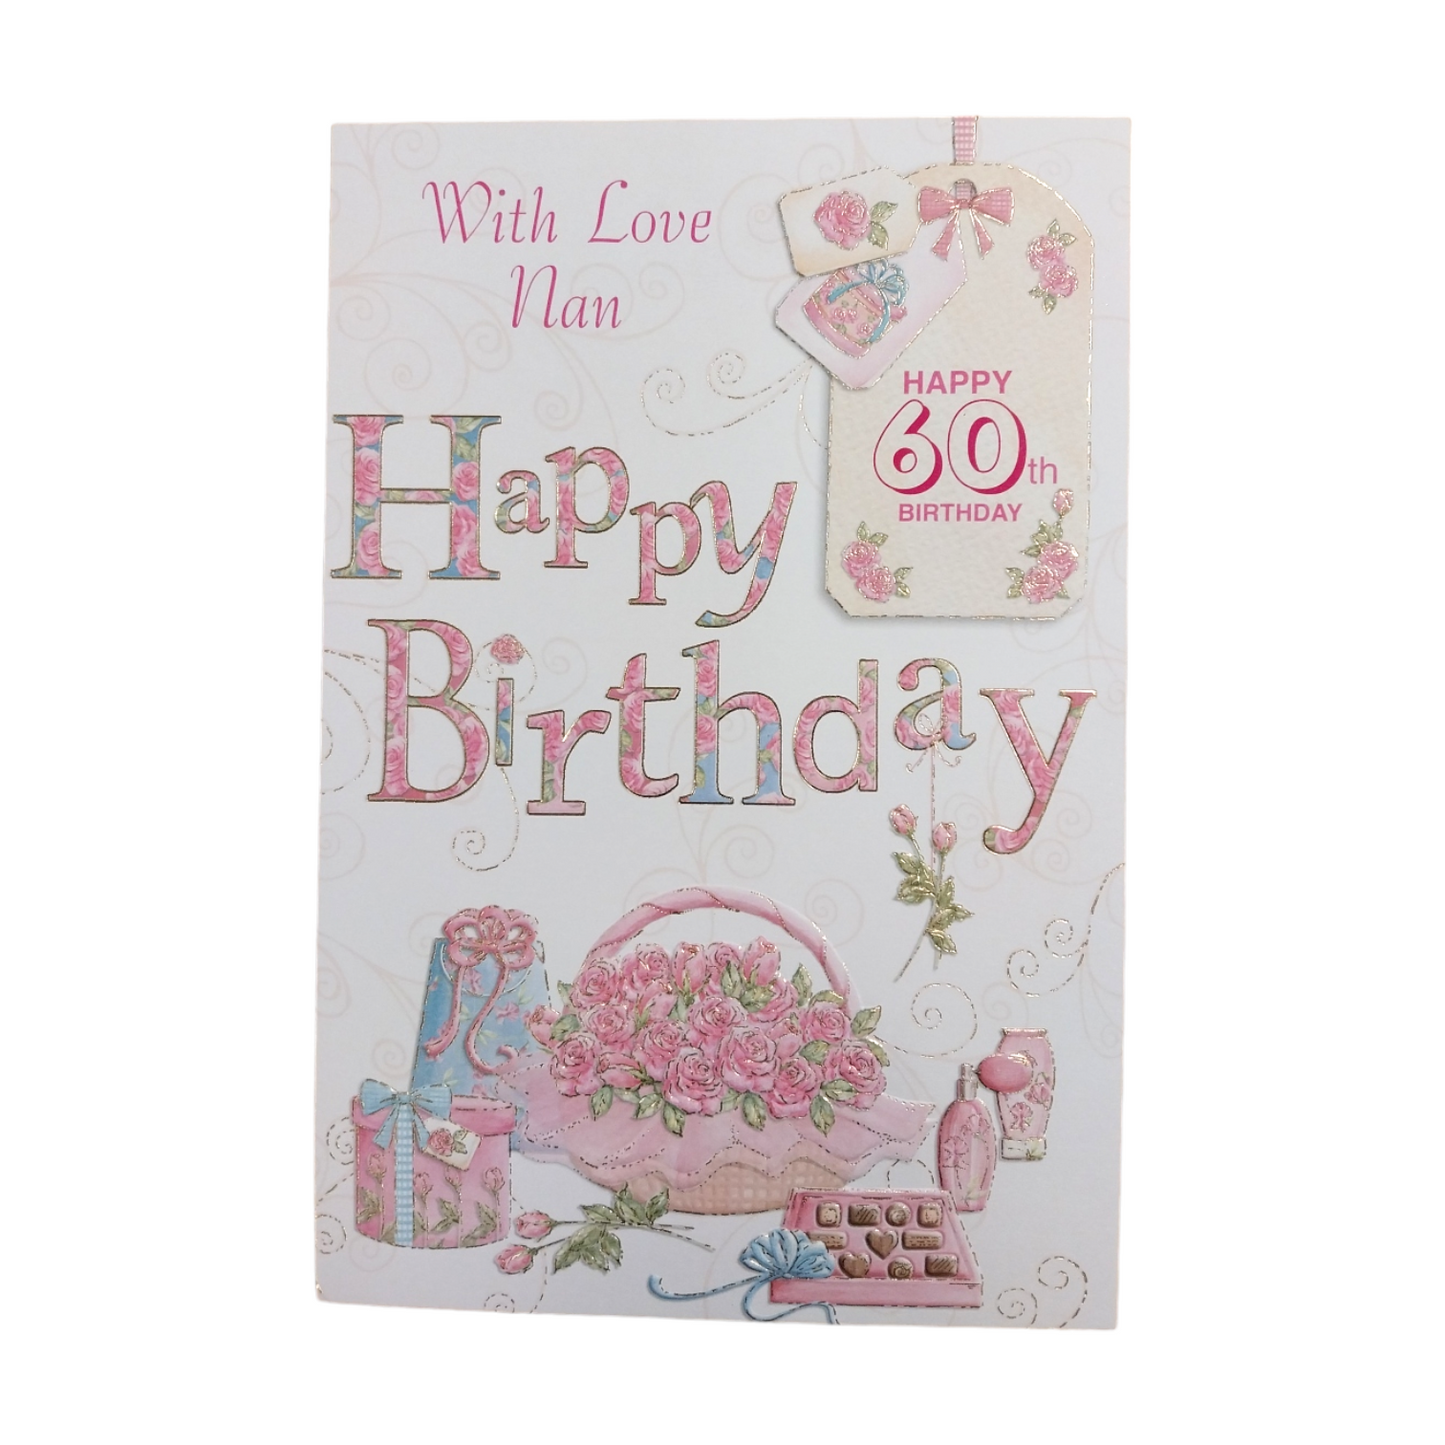 With Love Nan Happy 60th Birthday Roses Pink Beautiful Design Greeting Card